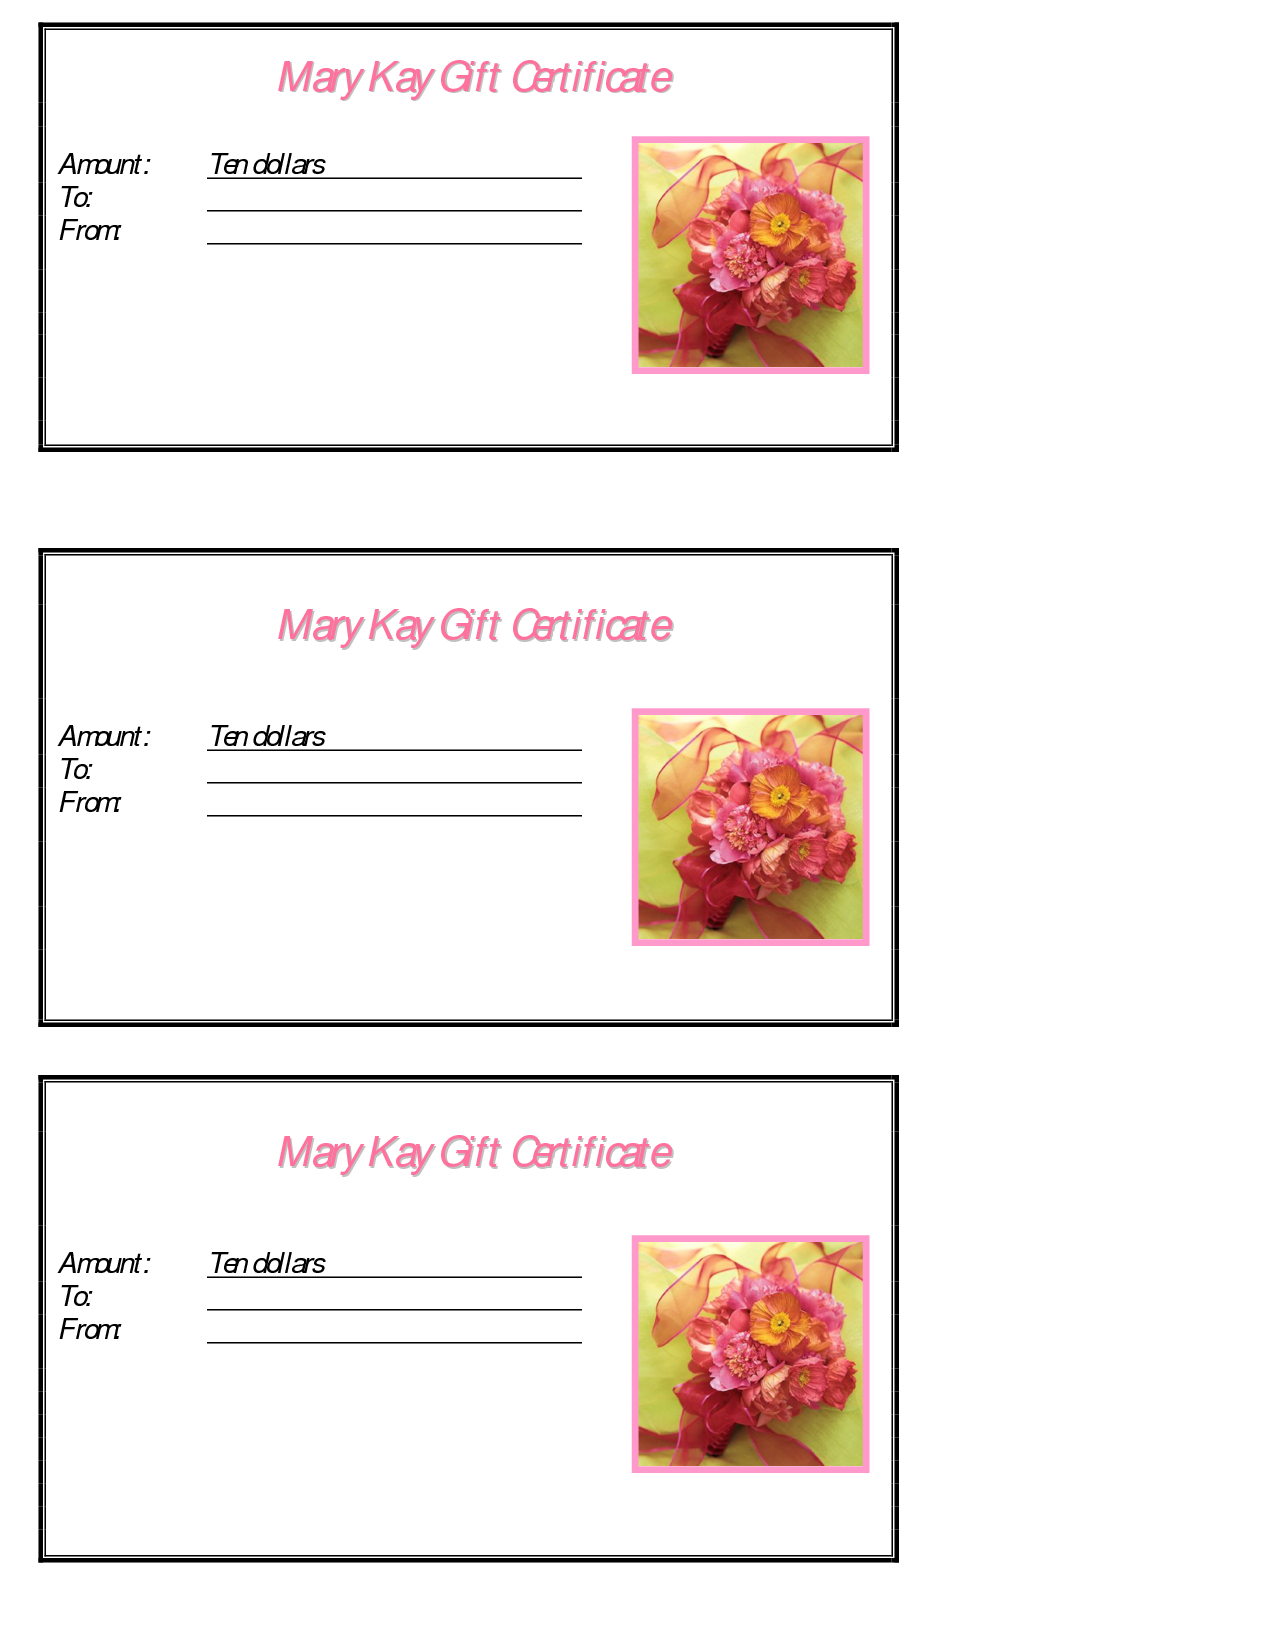 Mary Kay Gift Certificate Template This Is Your Index.html Throughout Mary Kay Gift Certificate Template